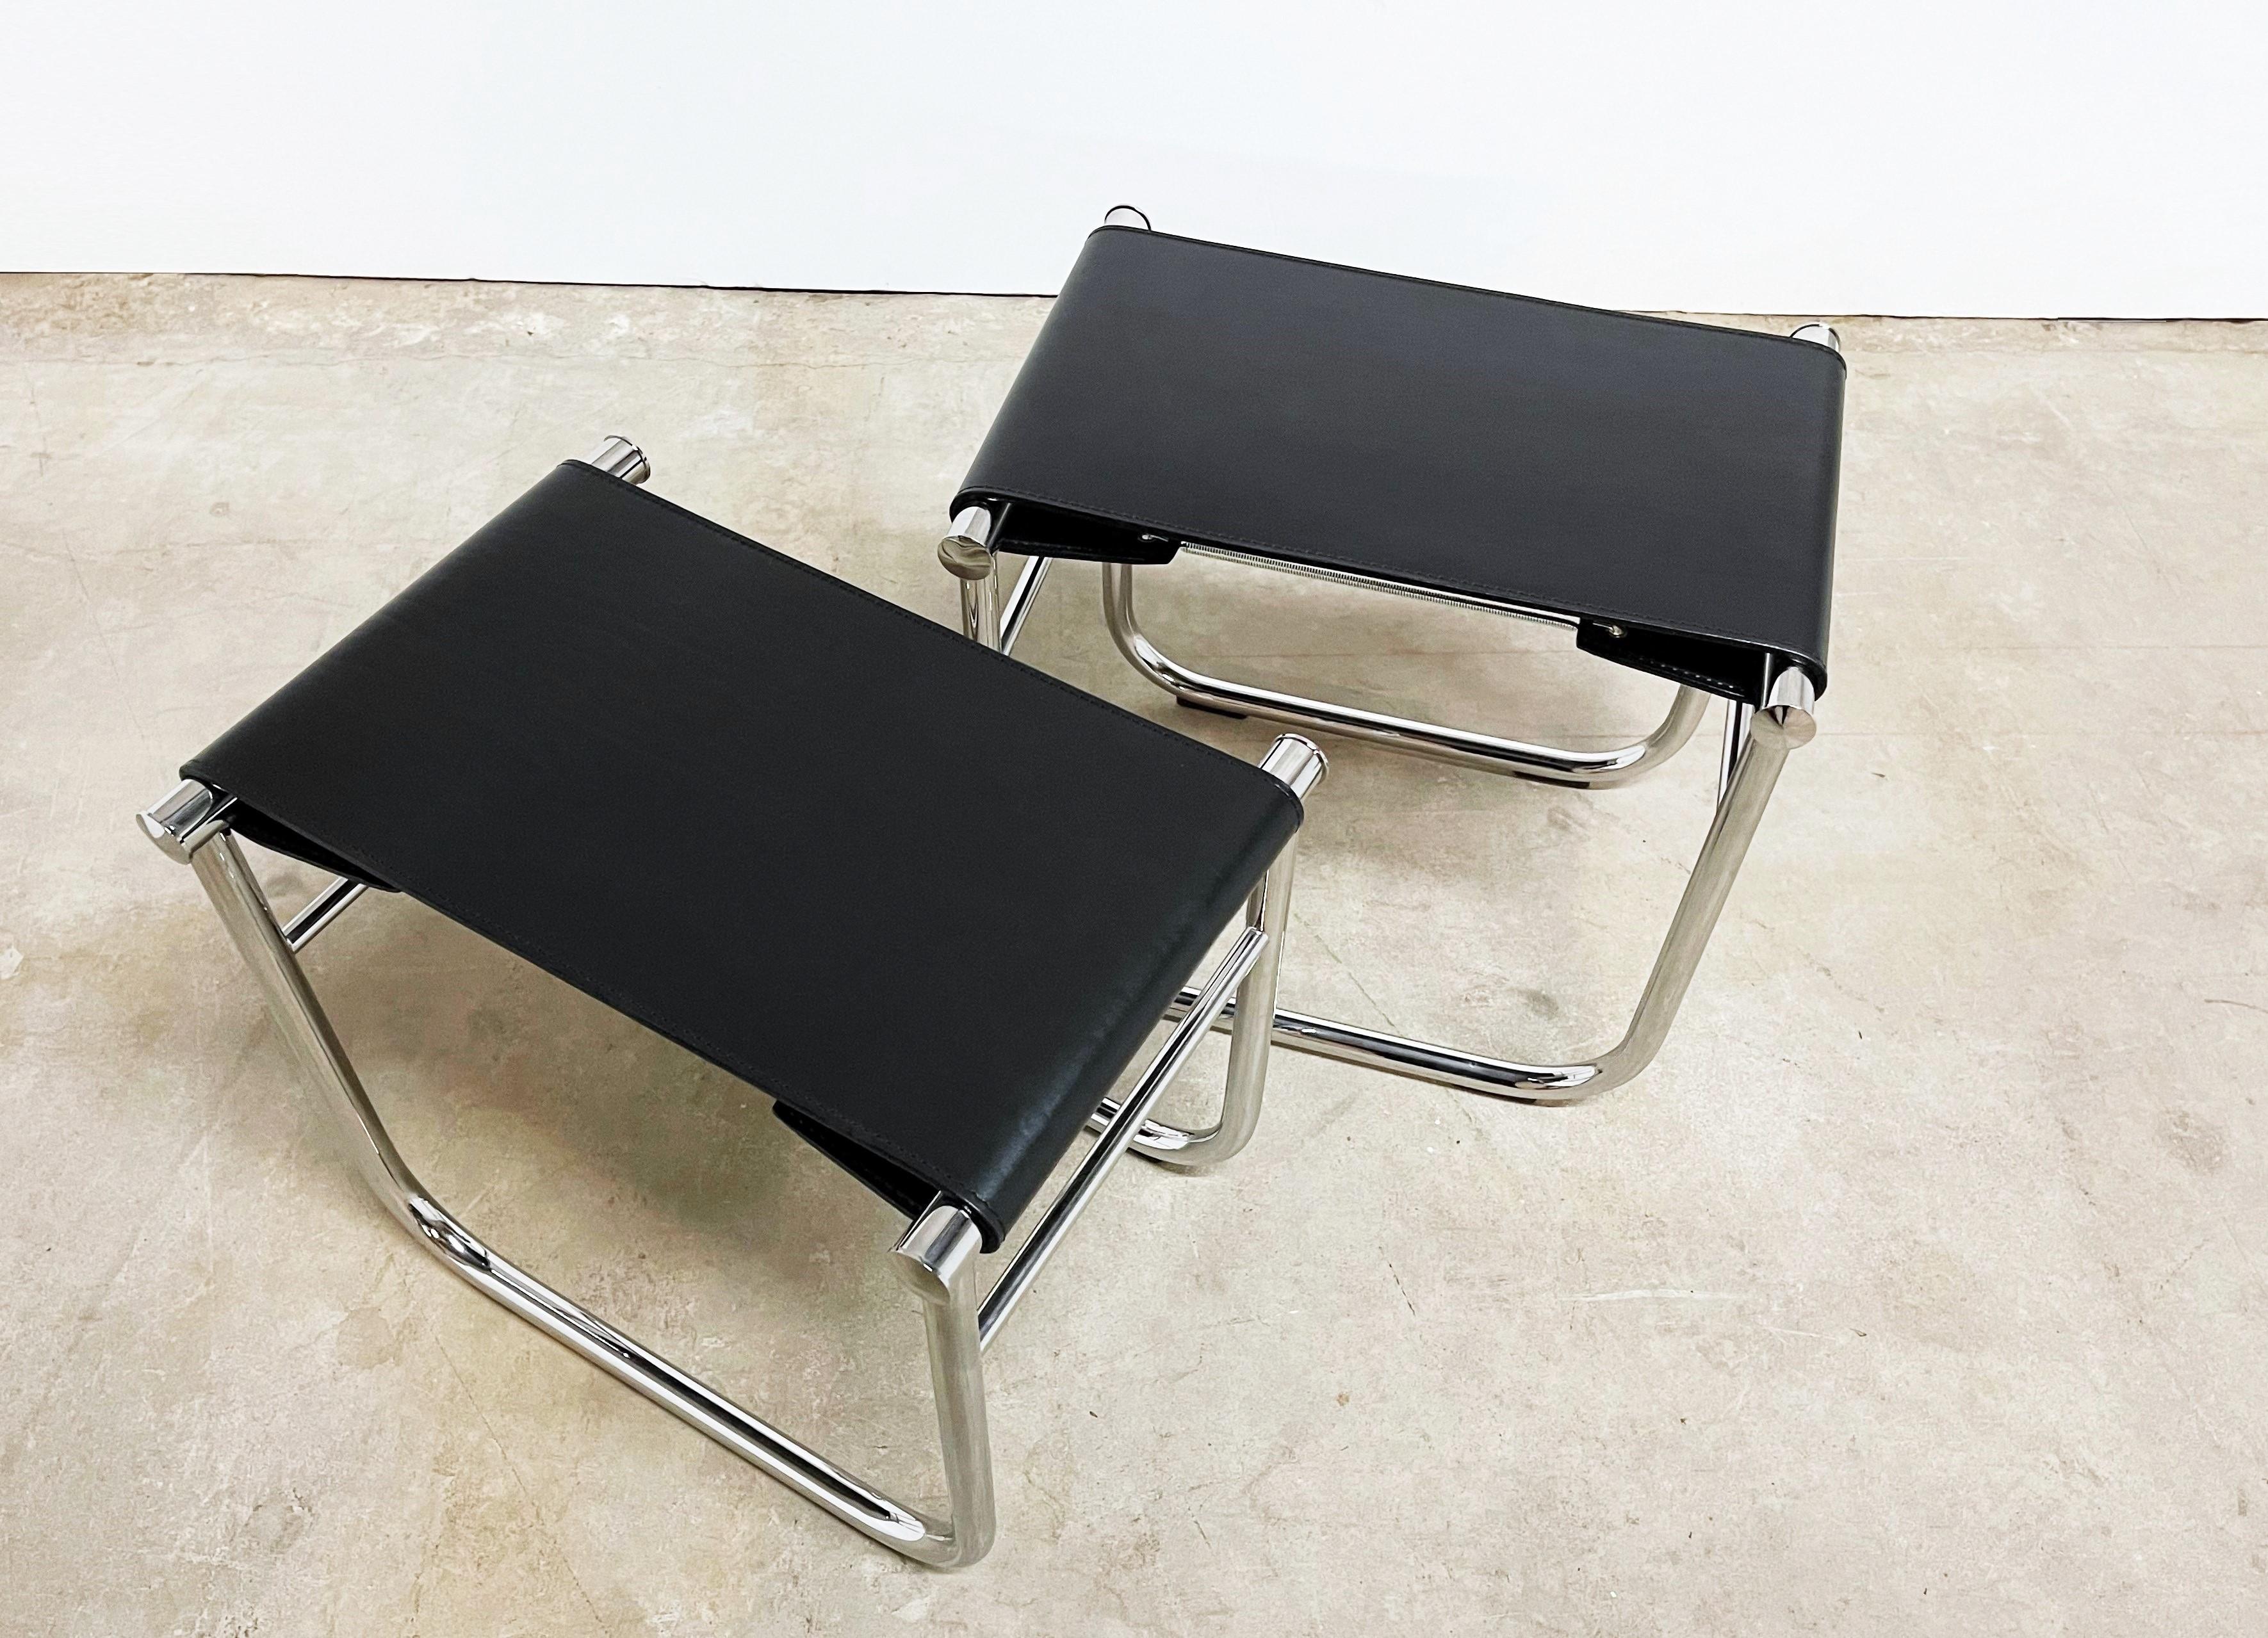 The minimalist LC9 stool is a classic and timeless design by Charlotte Perriand in 1927 and is now being produced by Cassina. Relaunched by Cassina in 1973/2014. Manufactured by Cassina in Italy. The frame is made of tubular chrome-plated stainless